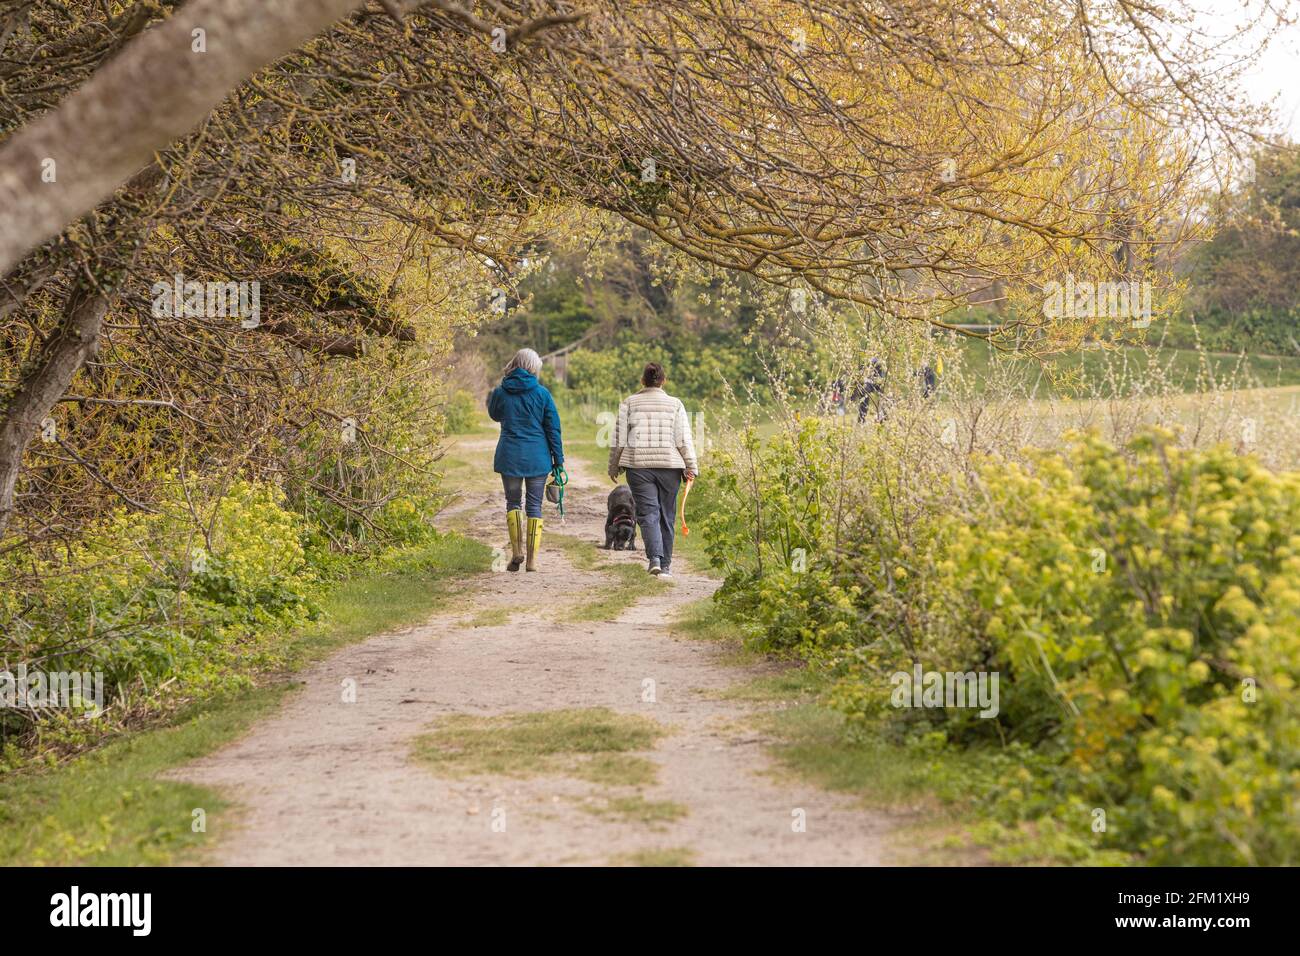 Two lady dog walkers on a country pathway Stock Photo